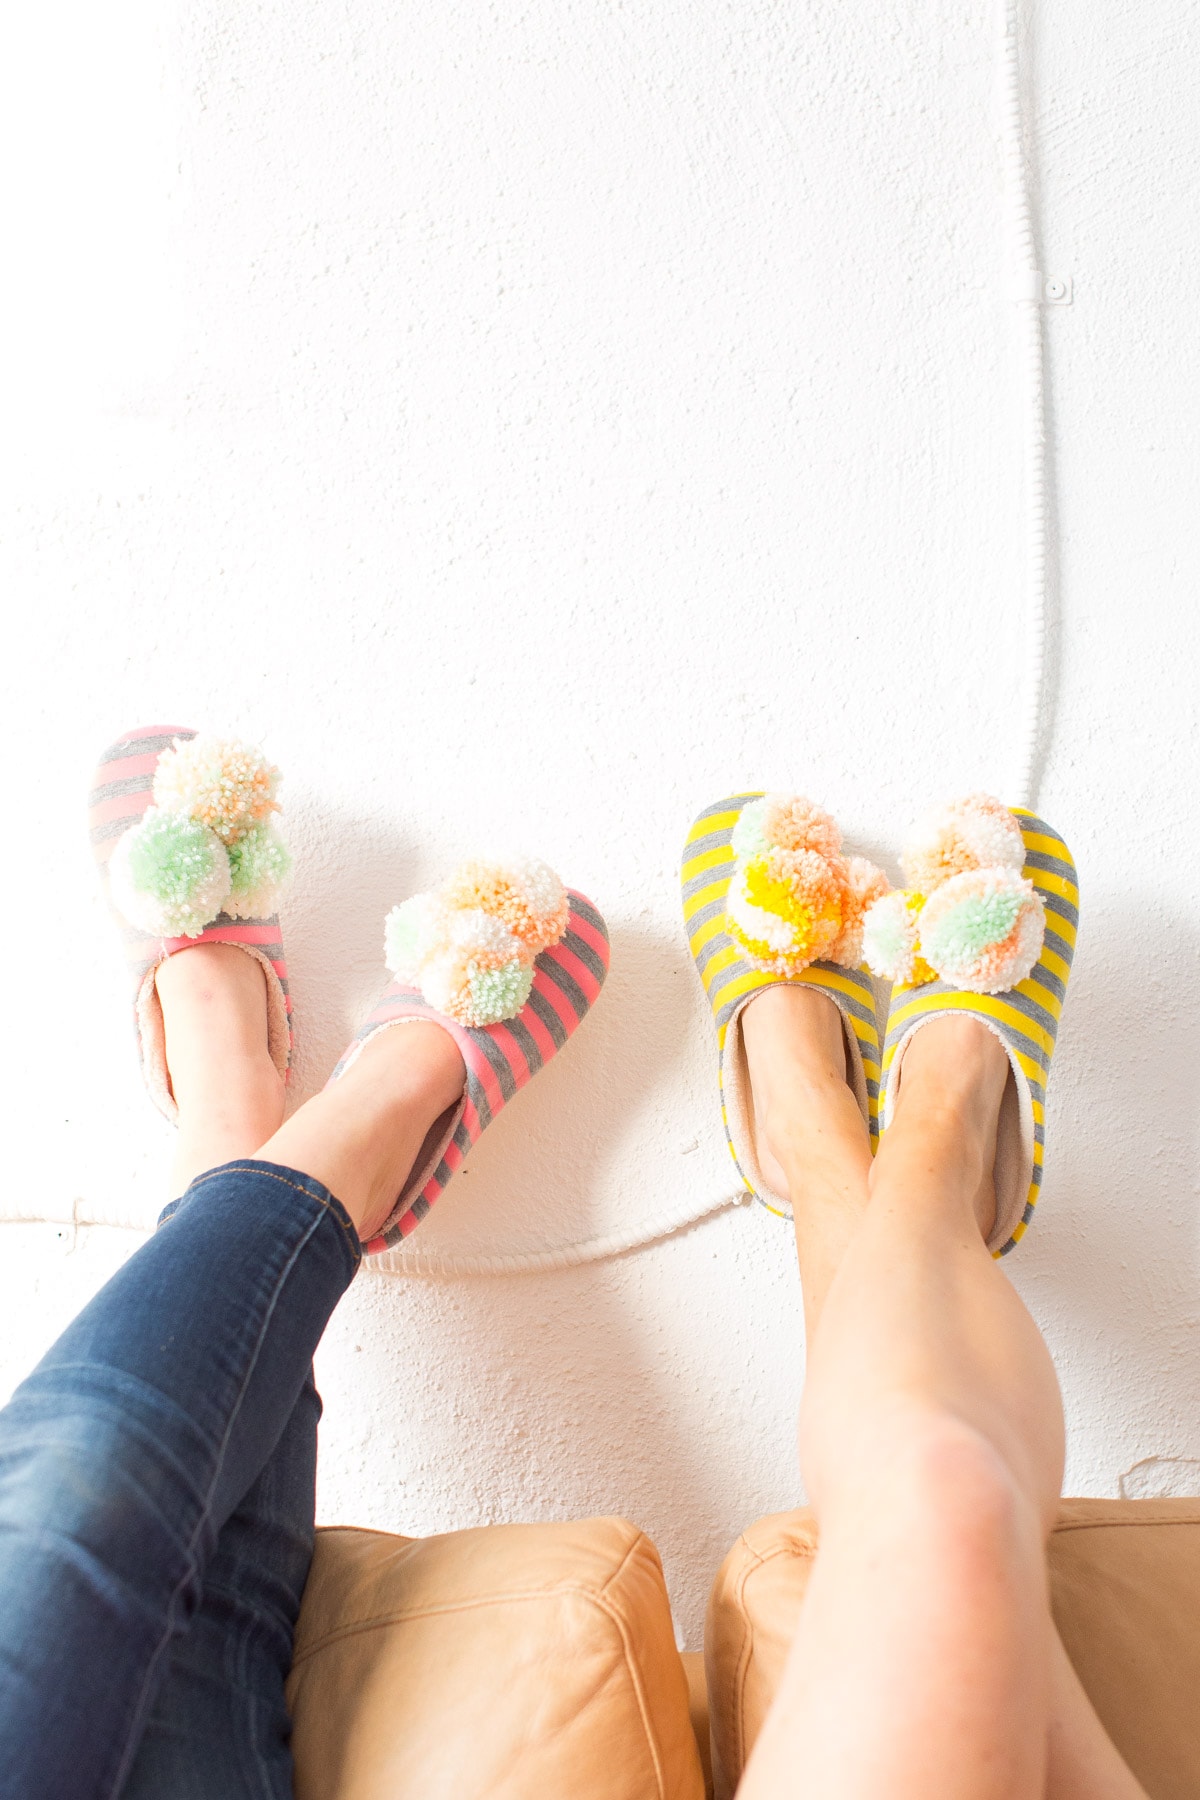 DIY pom pom slippers for Winter by lifestyle blogger and DIY blogger Ashley Rose of Sugar & Cloth